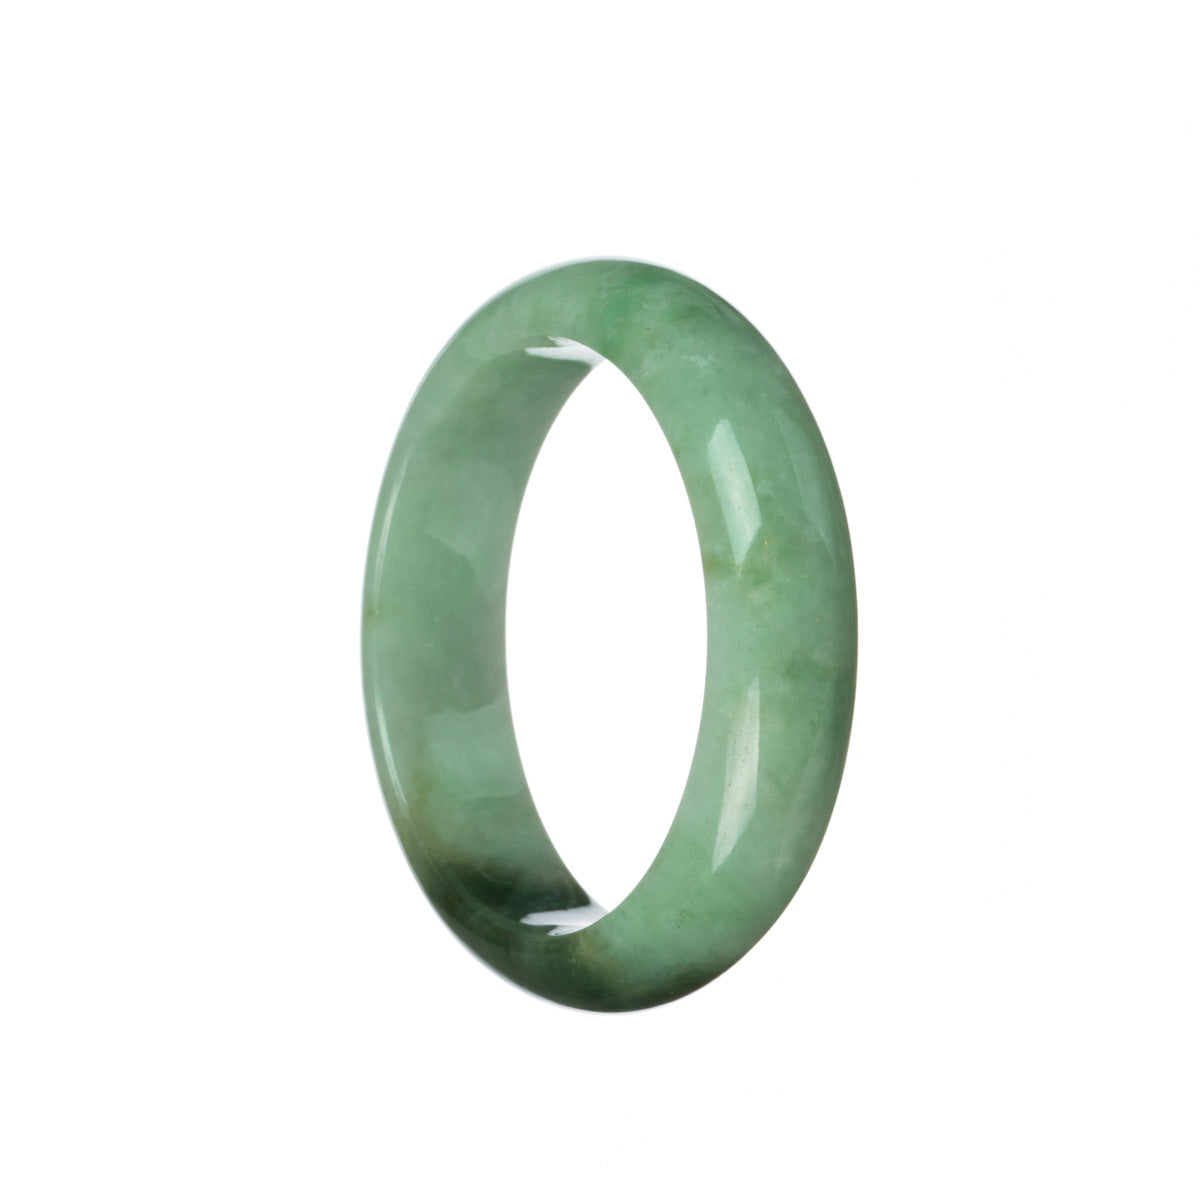 Real Untreated Green with dark green patch Traditional Jade Bangle Bracelet - 55mm Half Moon